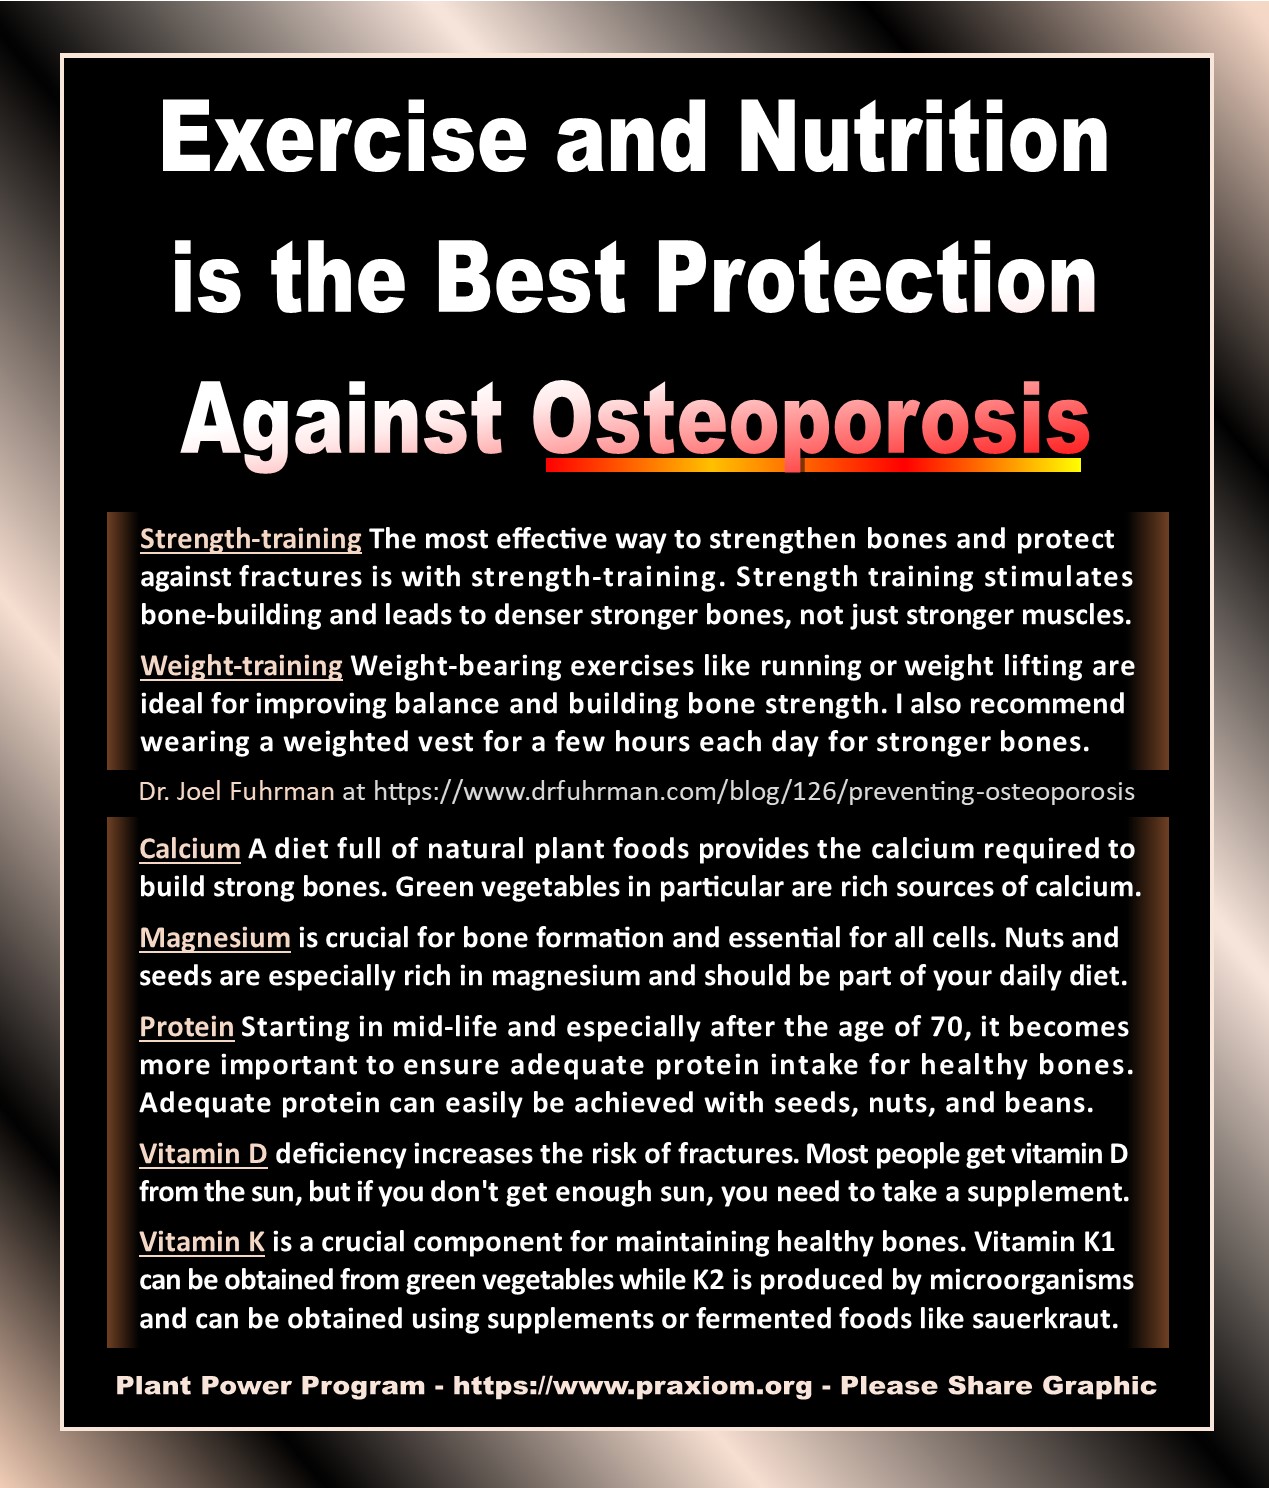 Exercise and Nutrition is The Best Protection Against Osteoporosis